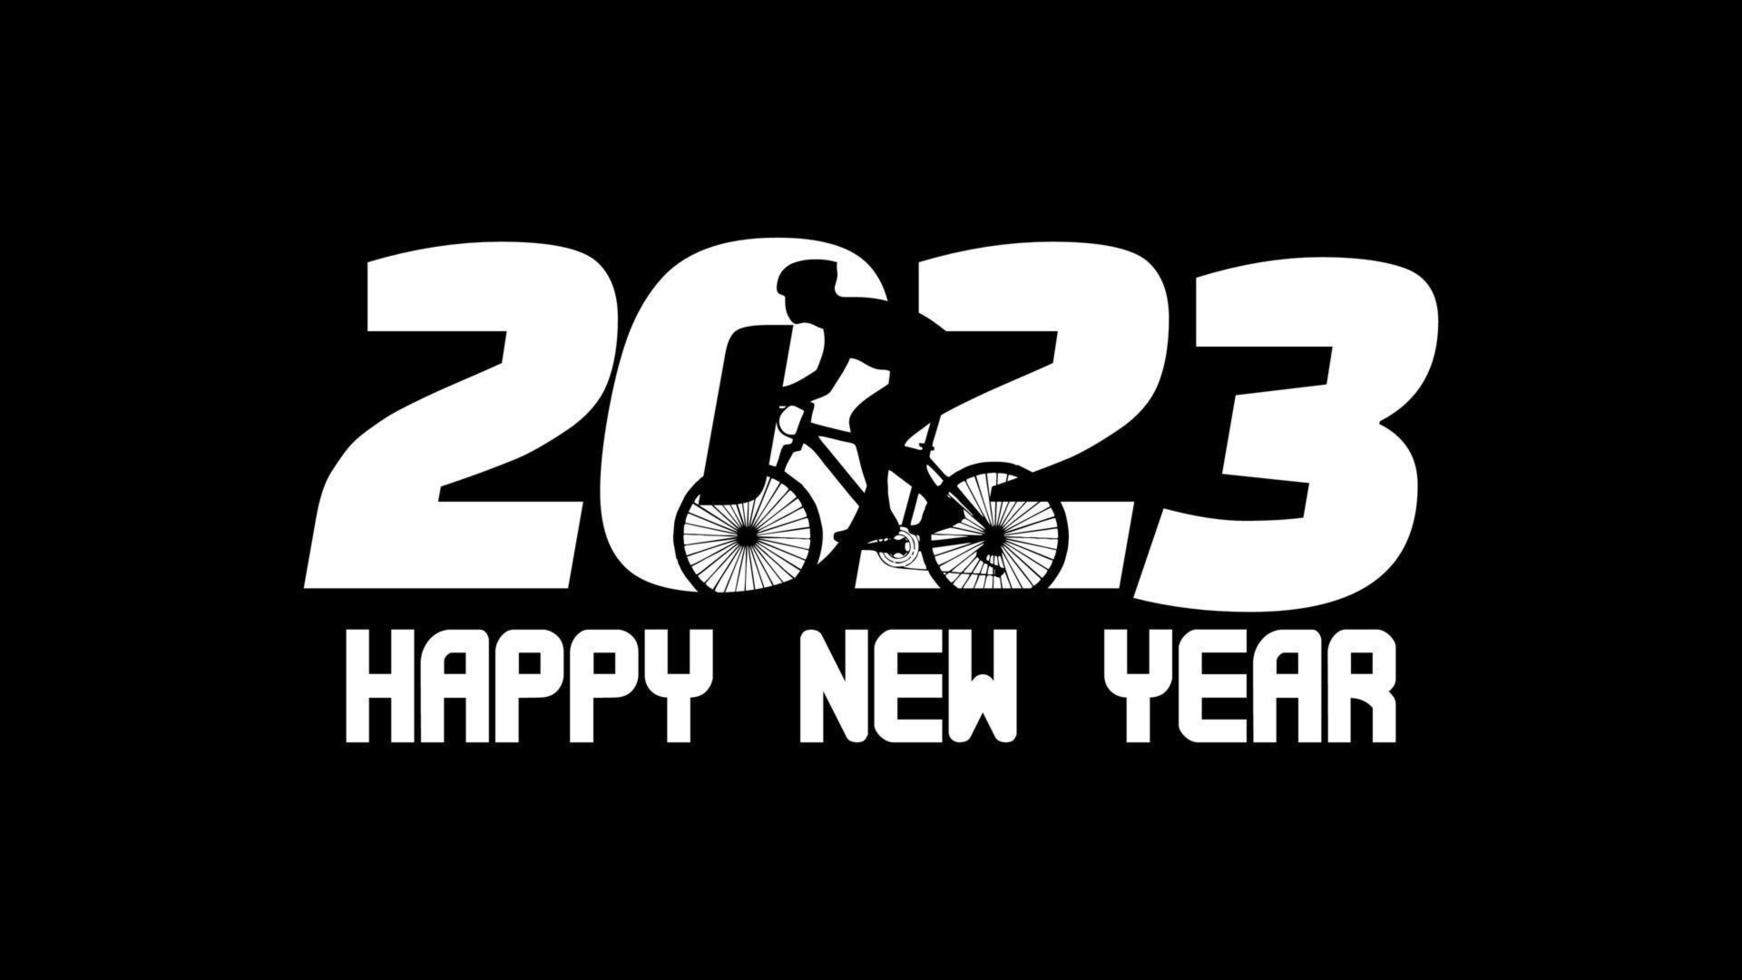 Happy New Year 2023 text with bicycle design. Cover of business diary for 2023 with wishes. Brochure design template, card, banner. Vector illustration. Isolated on black background.